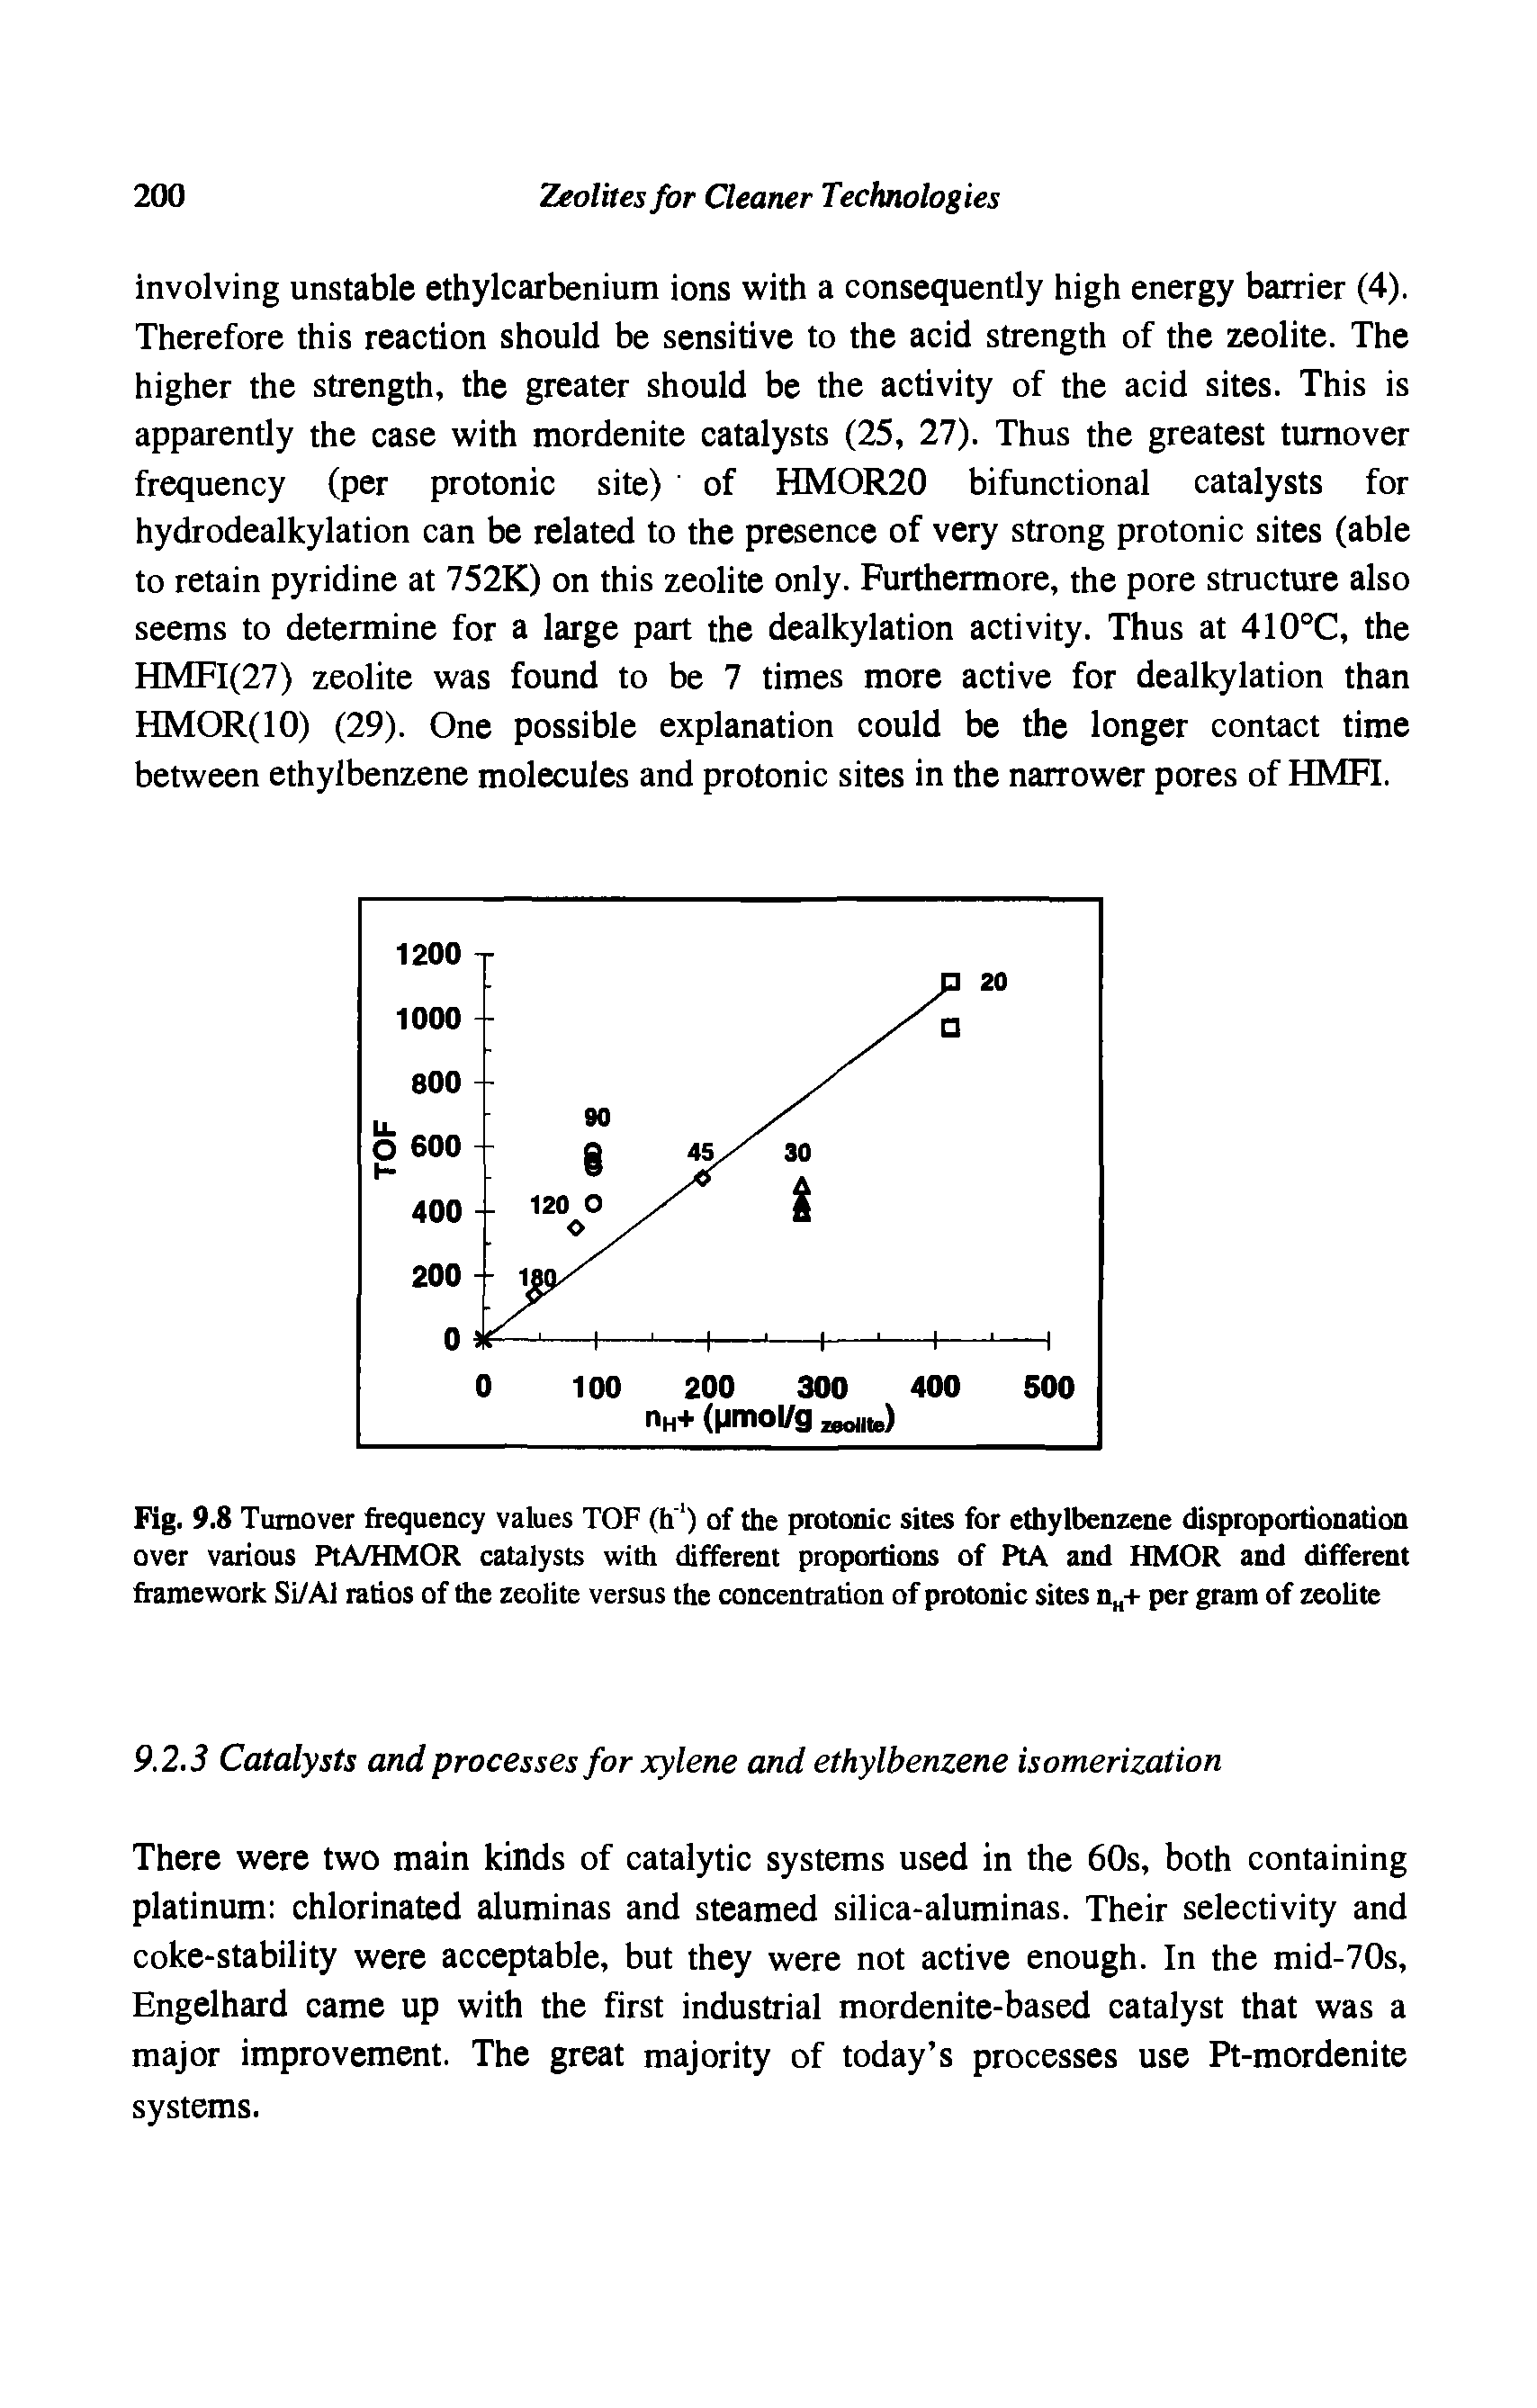 Fig. 9.8 Turnover frequency values TOF (h1) of the protonic sites for ethylbenzene disproportionation over various PtA/HMOR catalysts with different proportions of PtA and HMOR and different framework Si/Al ratios of the zeolite versus the concentration of protonic sites nH+ per gram of zeolite...